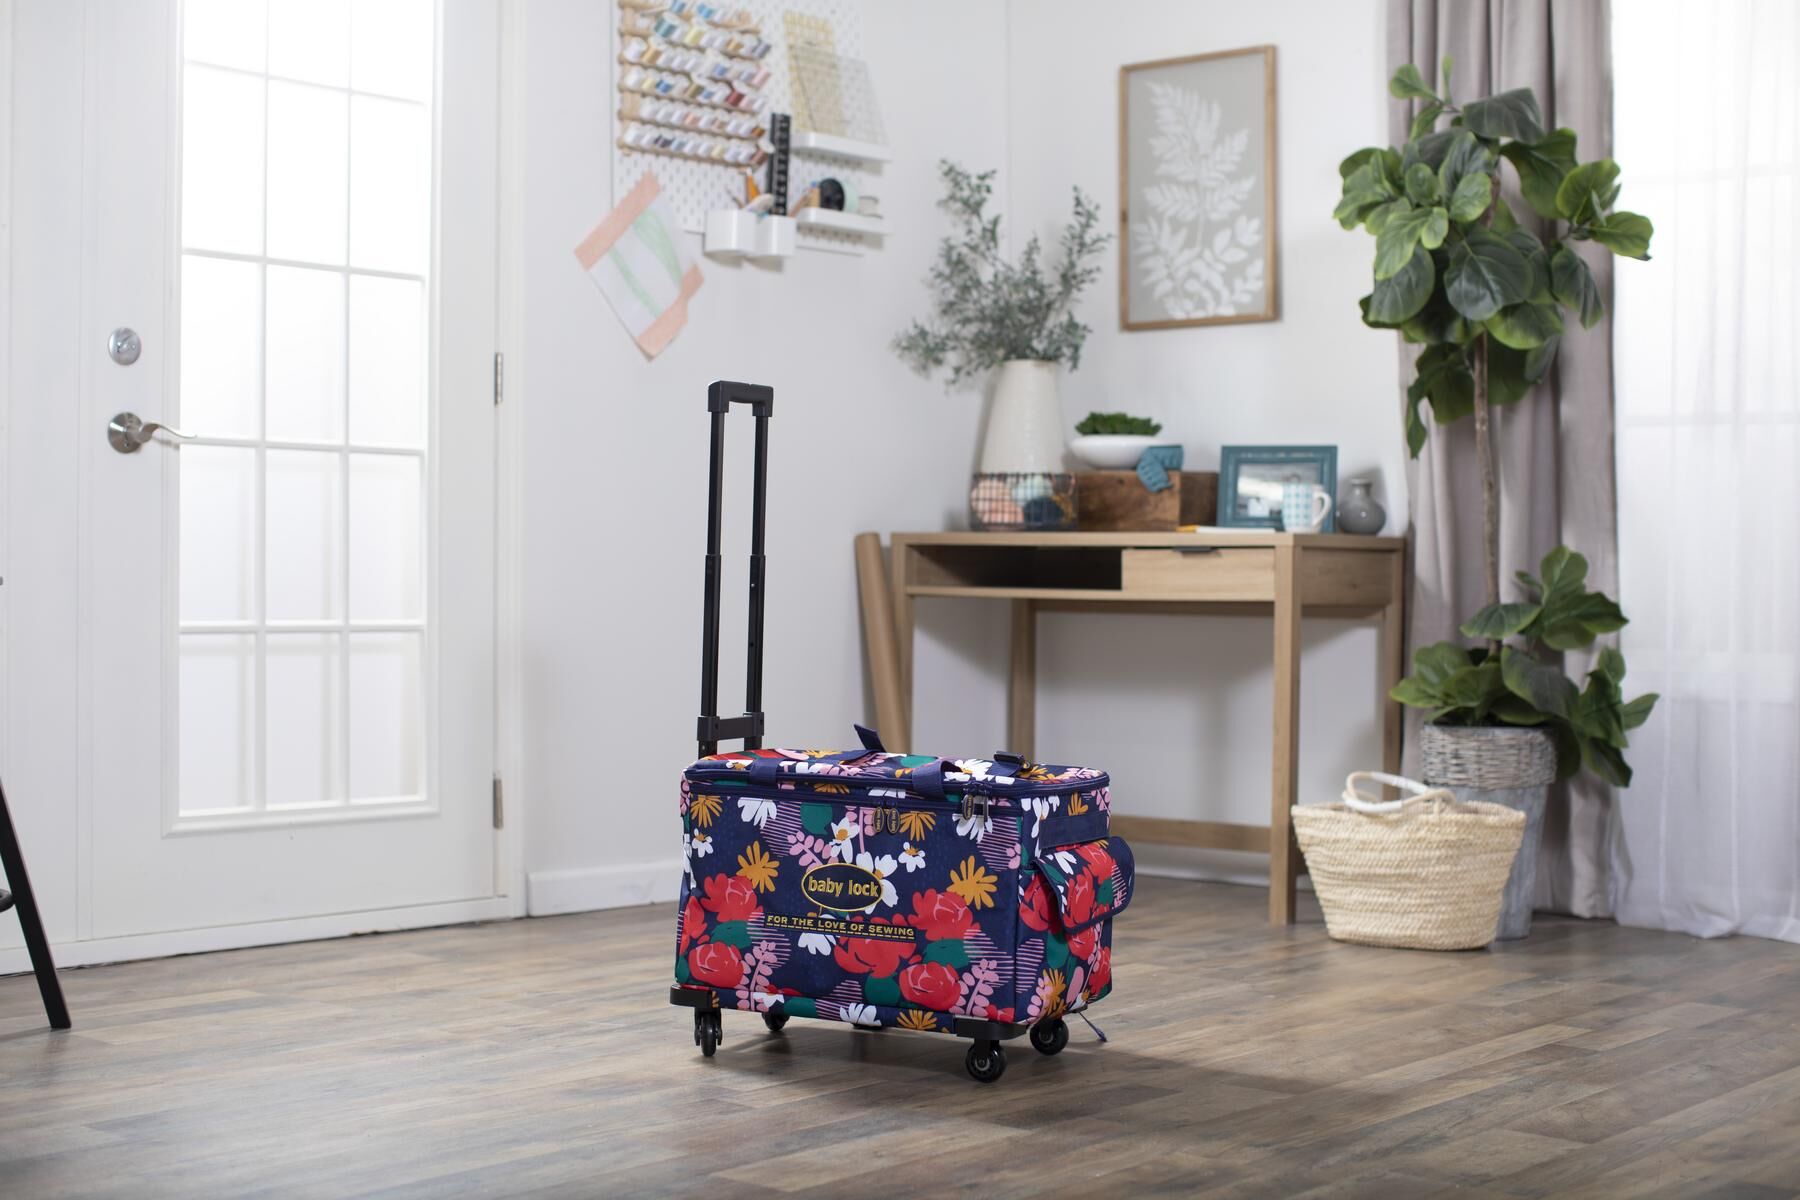 Baby Lock Limited Edition Floral Print XL Machine Trolley with Included Embroidery Arm Bag,Baby Lock Limited Edition Floral Print XL Machine Trolley,Baby Lock Limited Edition Floral Print XL Machine Trolley with Included Embroidery Arm Bag,Baby Lock Limited Edition Floral Print XL Machine Trolley